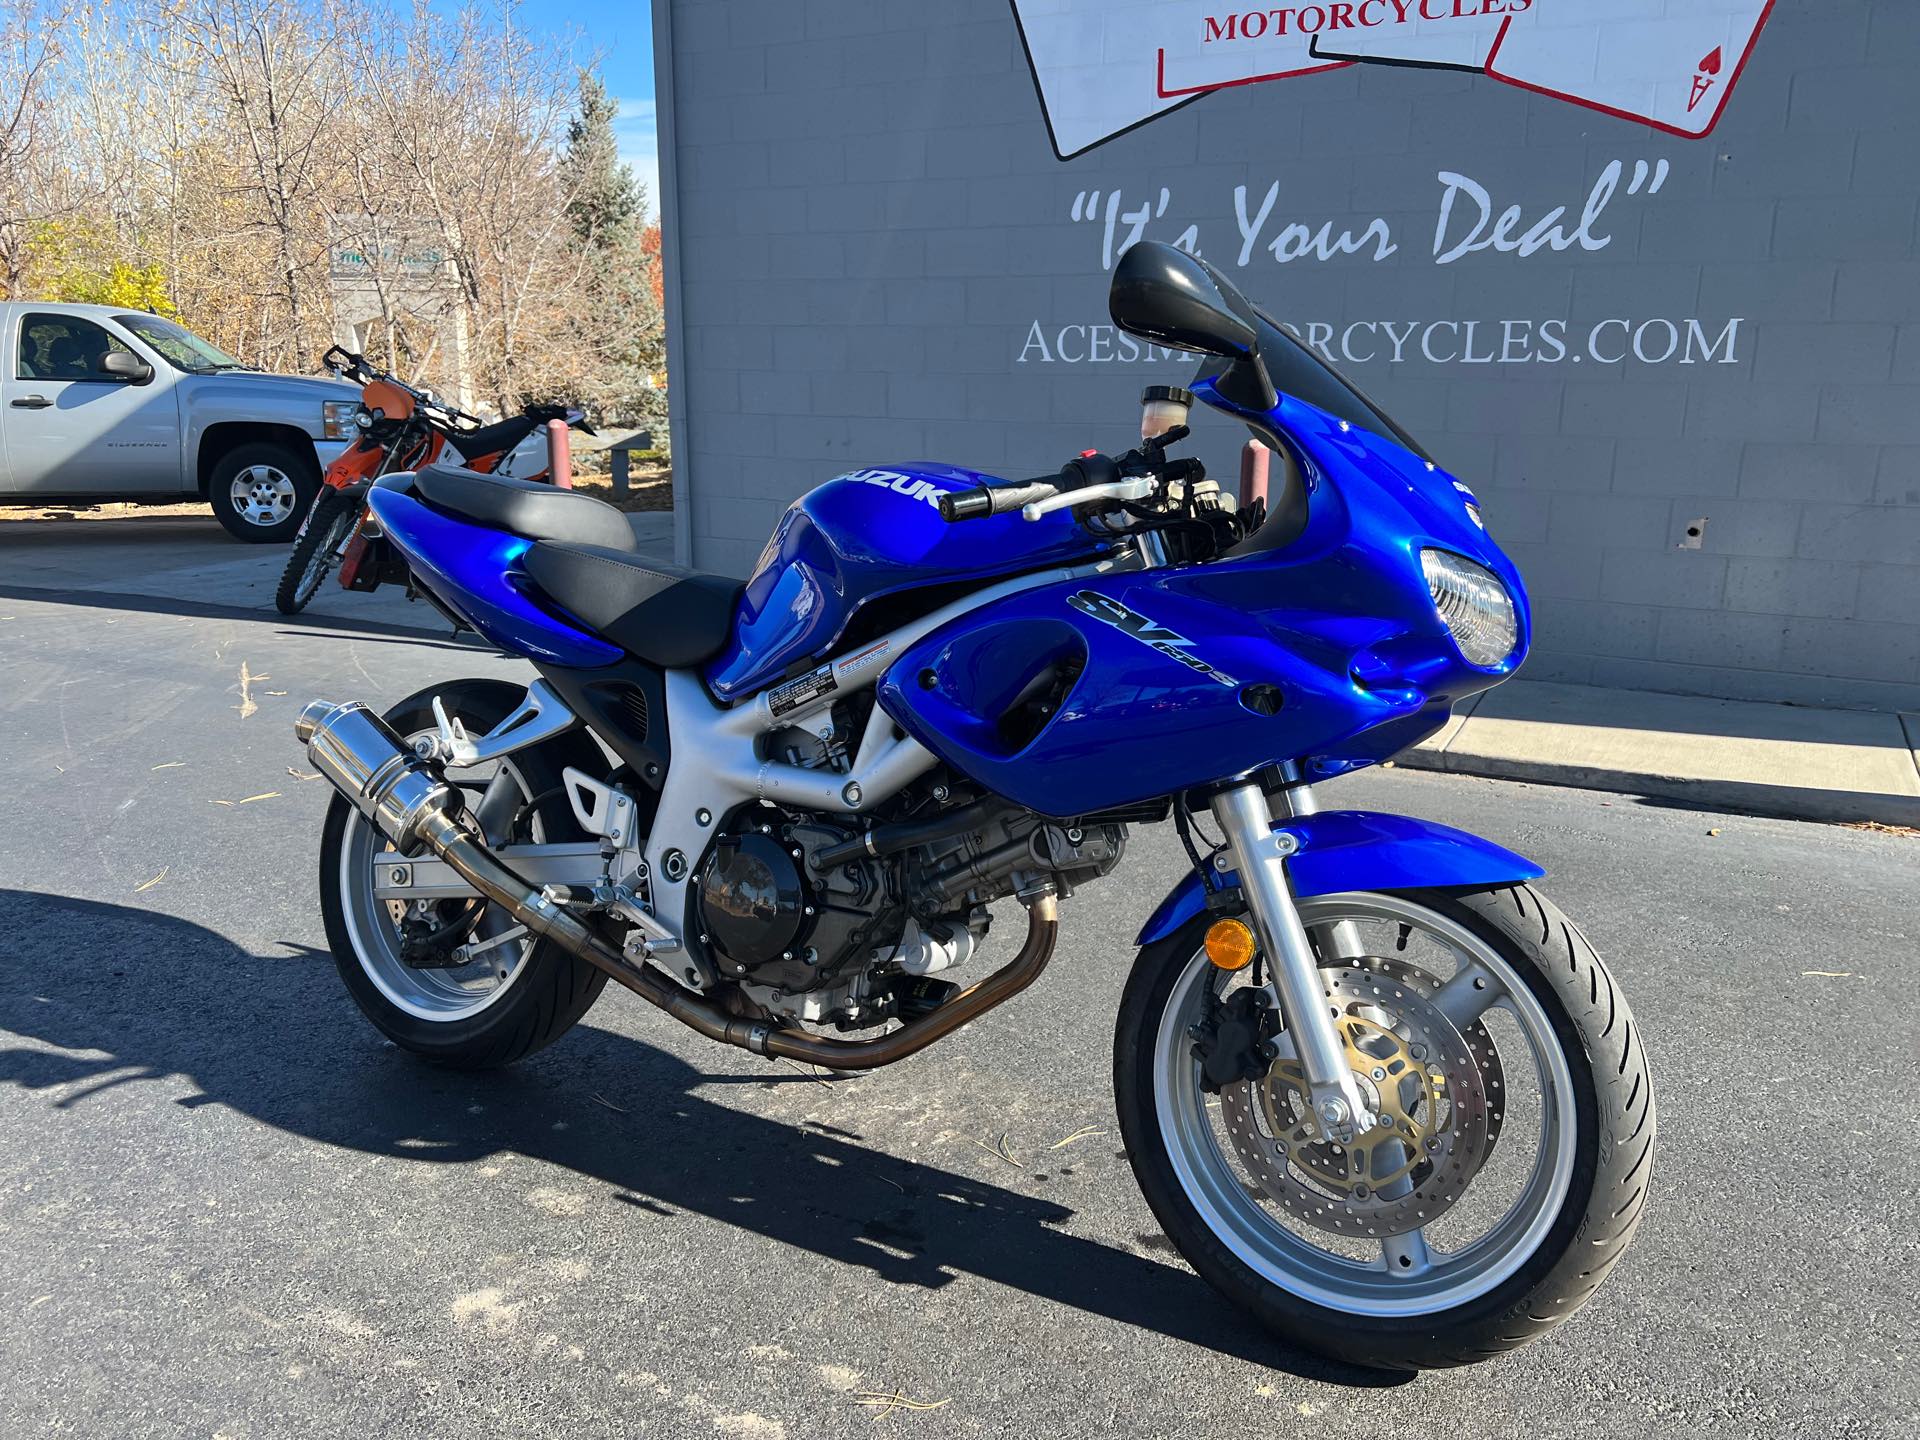 2001 SUZUKI SV650SK1 at Aces Motorcycles - Fort Collins